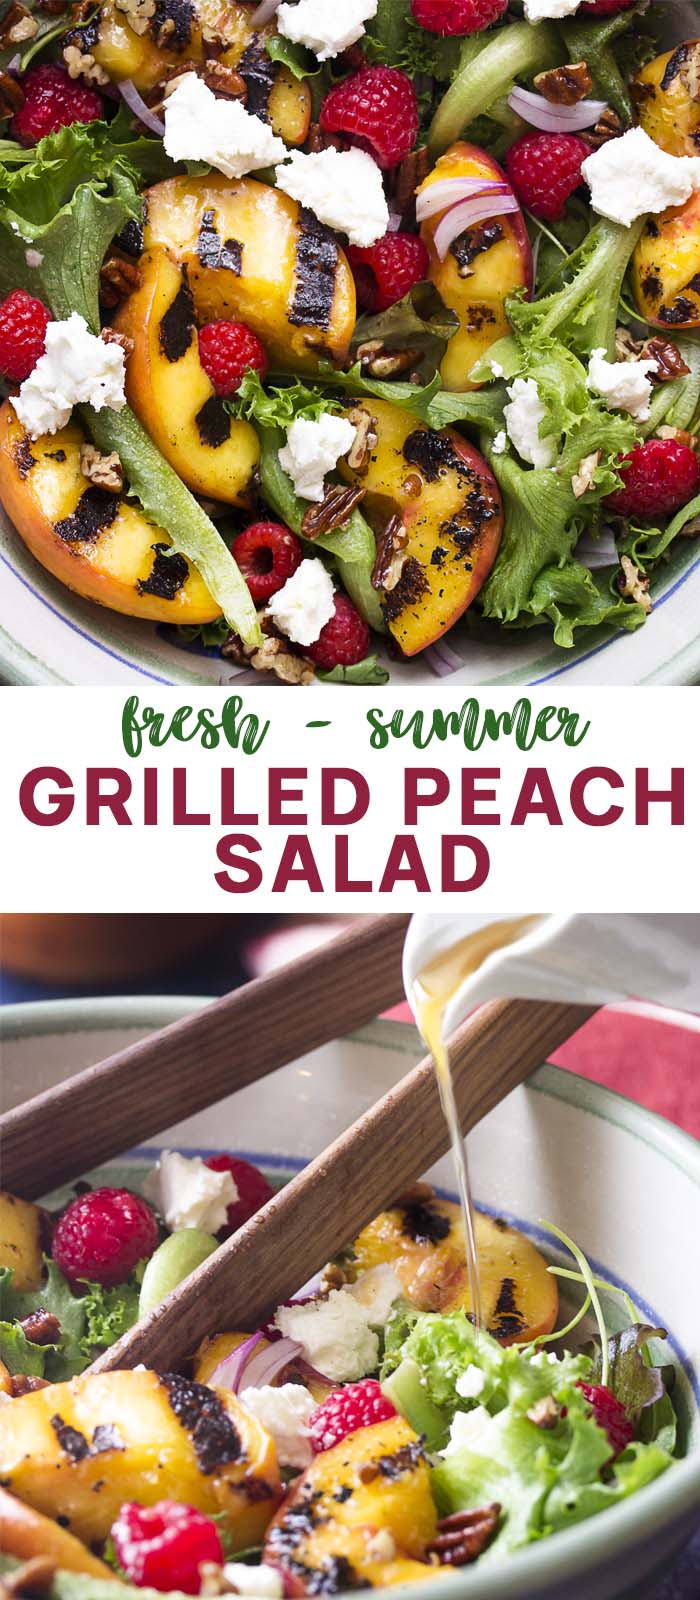 Two views of a serving bowl of salad with text overlay - Grilled Peach Salad.